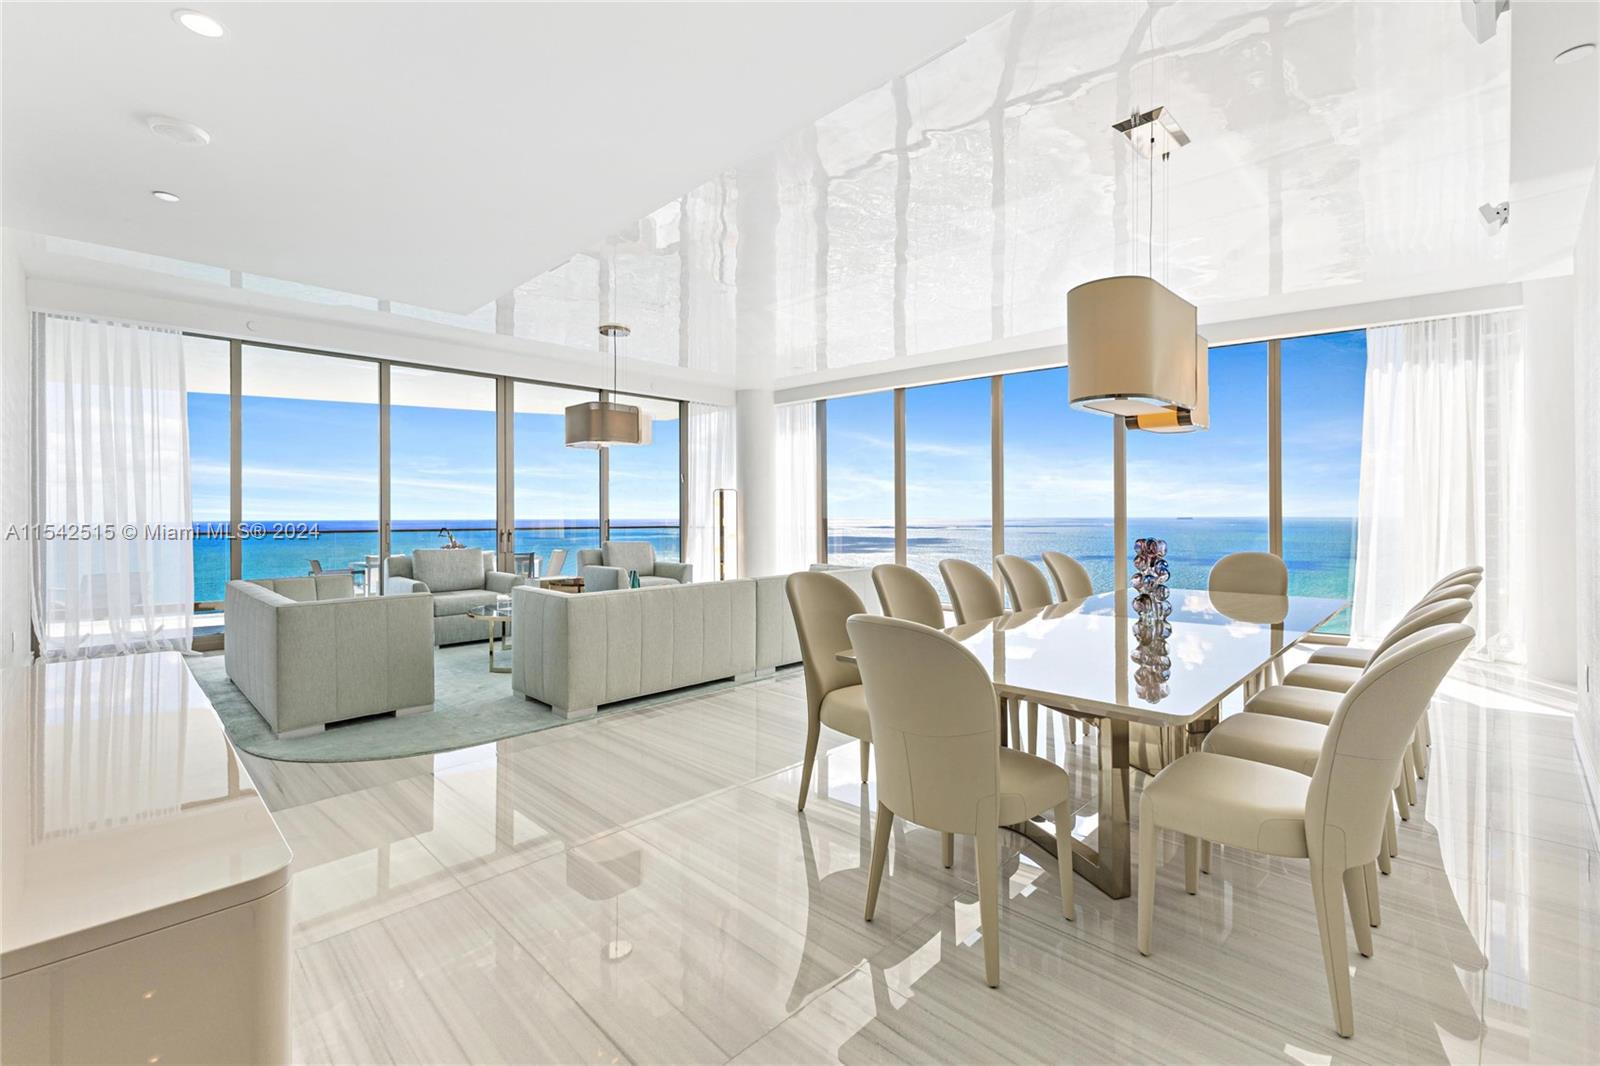 Elevate your lifestyle to the utmost level of sophistication at The Estates at Acqualina. This incredible five bedroom corner residence has the most magnificent finishes, and the best views of the building. Residence will also be delivered with motorized shades throughout and AV system. This unit is located in the sought after South tower at the Estates at Acqualina. This south facing unit has a state of the art kitchen with Wolf ovens, Subzero refrigerators, two dishwashers, two sinks, two warming drawer and a wine refrigerator. A large pantry with an extra full size freezer.  Enjoy what the Five star, Five diamond Acqualina lifestyle has to offer and be amongst the selected few that get to call the Estates at Acqualina home!